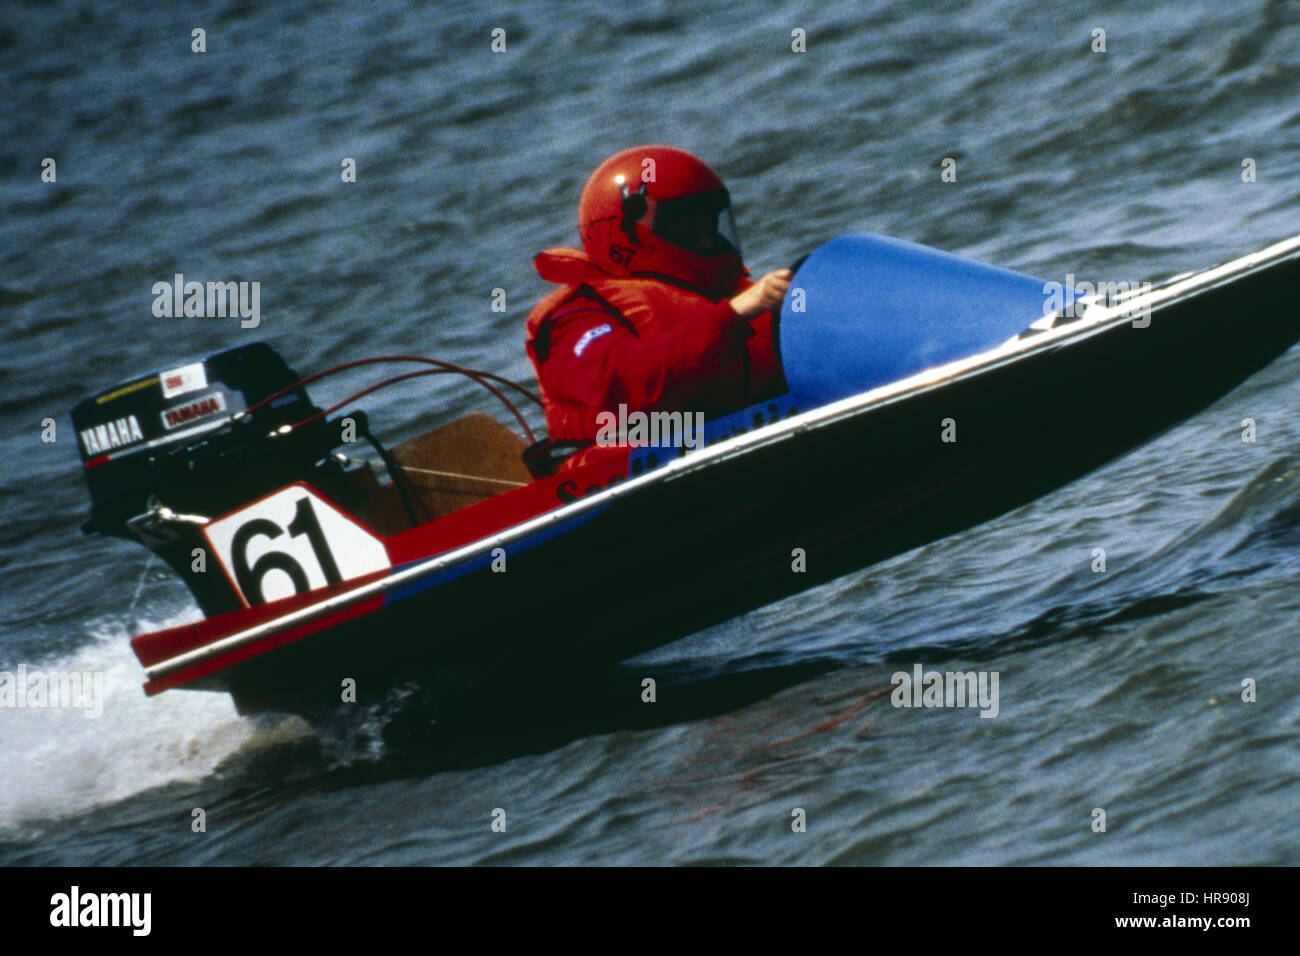 Power Boat racing, Oulton Broad, Suffolk, England Stock Photo